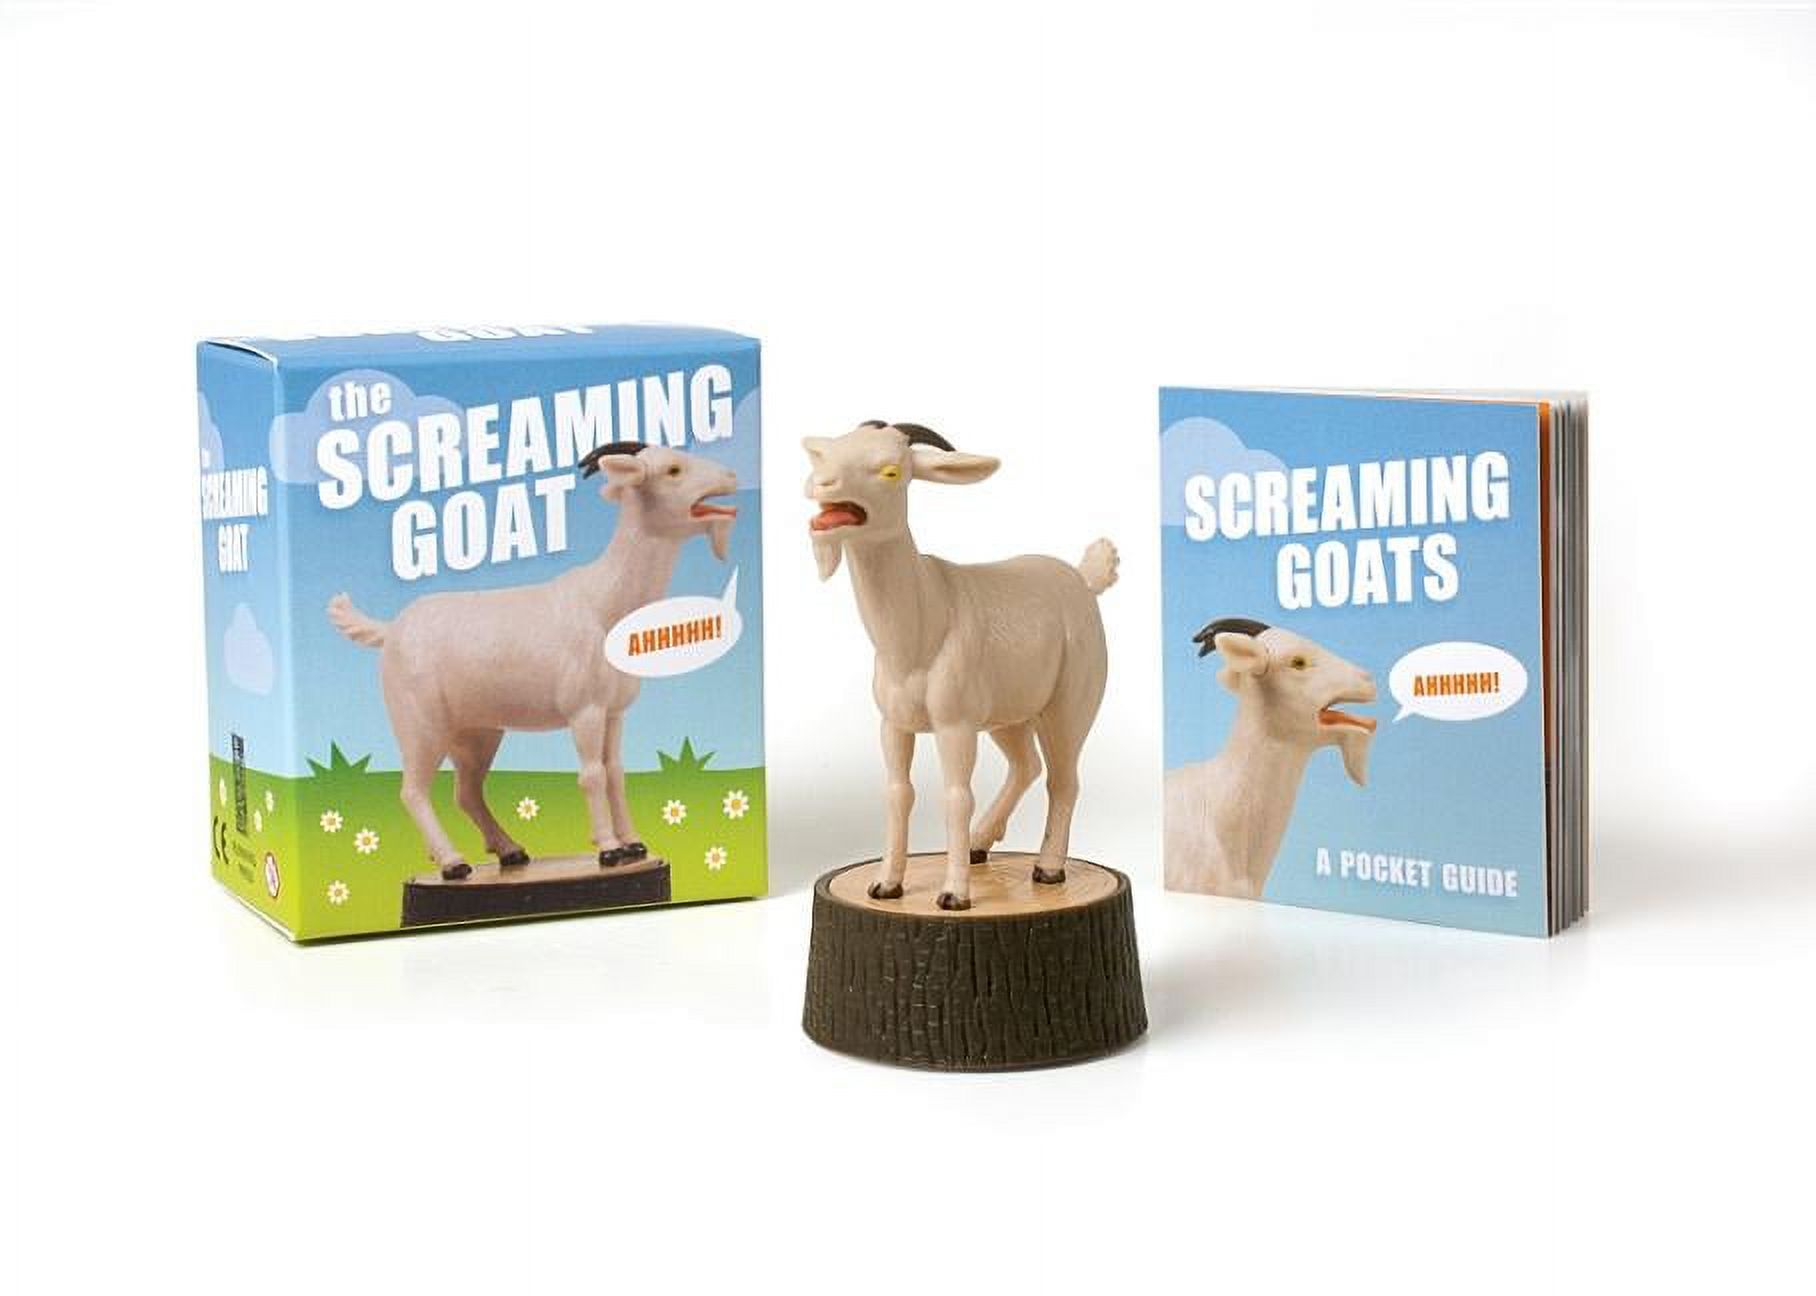 RP Minis: The Screaming Goat (Paperback) - image 1 of 1